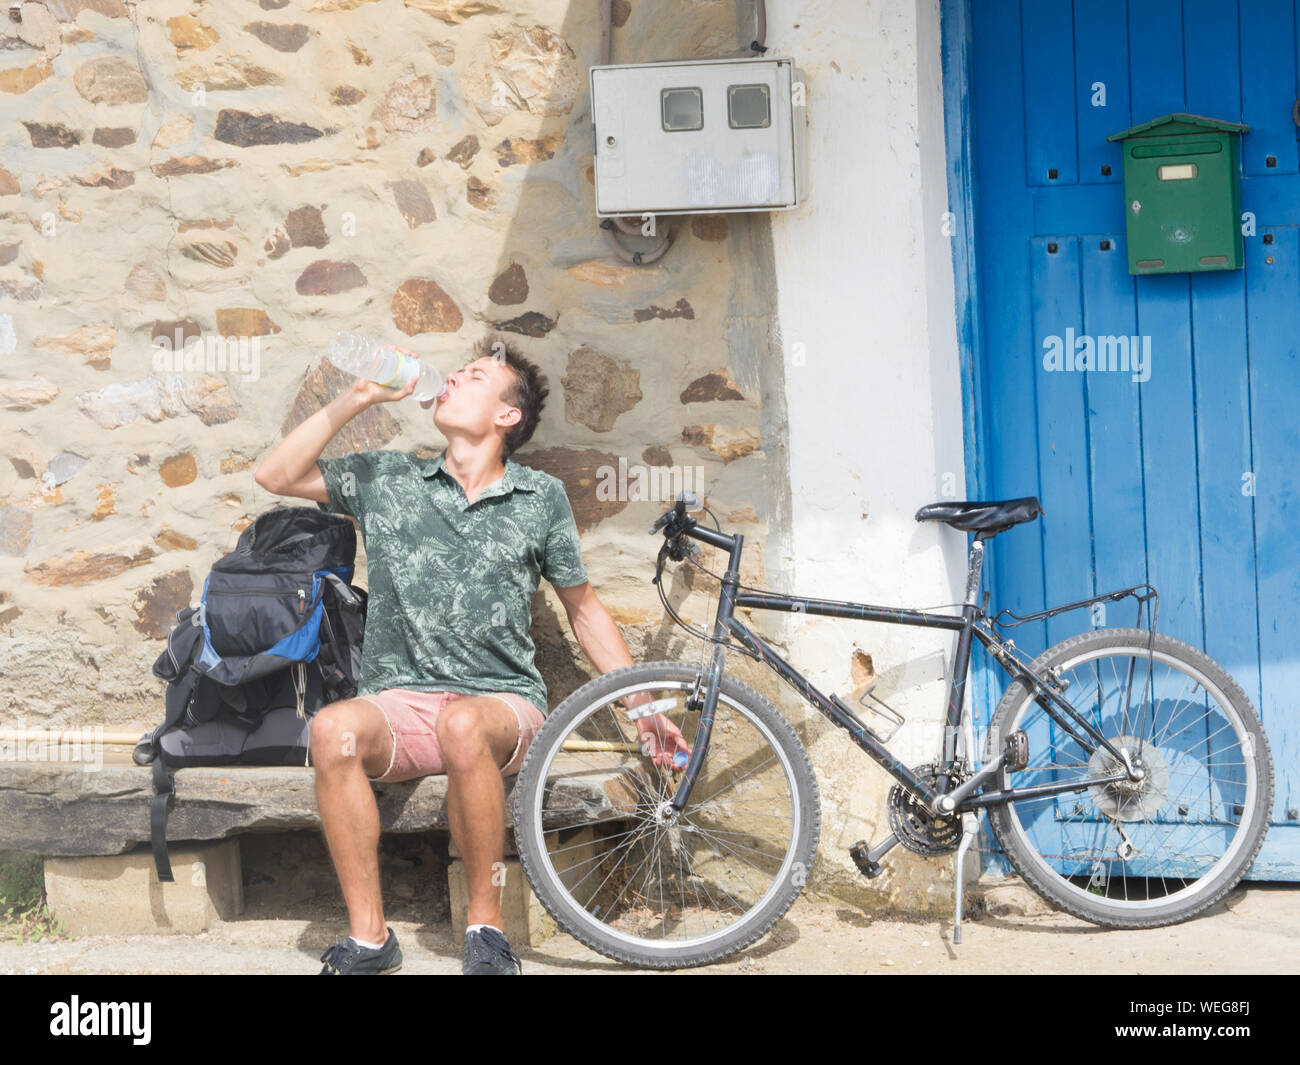 Young Man With Bicycle Drinking Water While Sitting On Seat Stock Photo